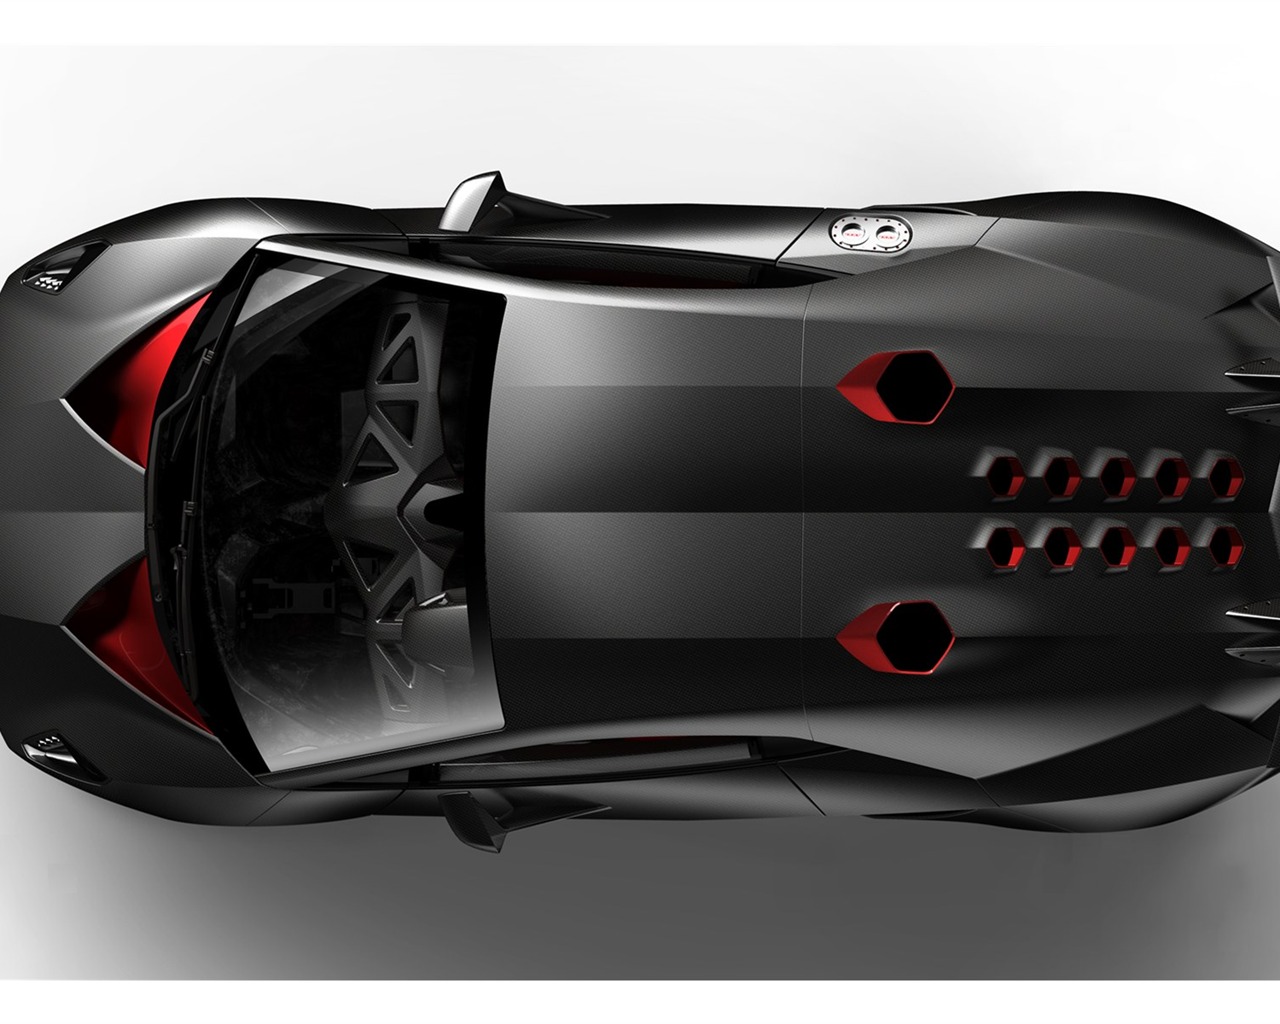 Special edition of concept cars wallpaper (17) #17 - 1280x1024